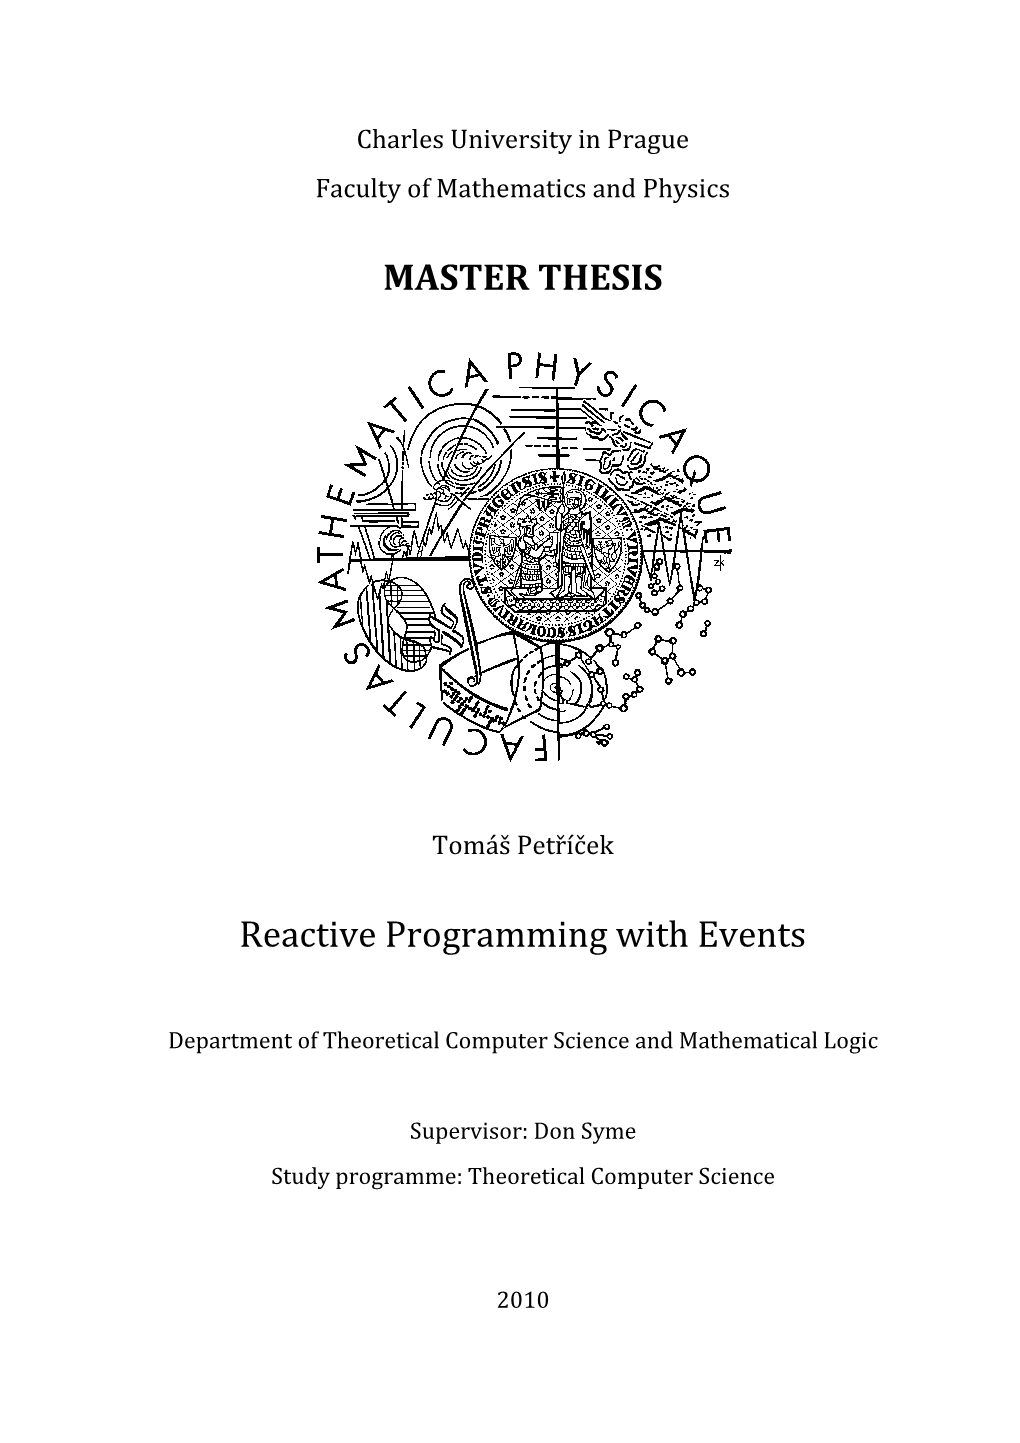 MASTER THESIS Reactive Programming with Events